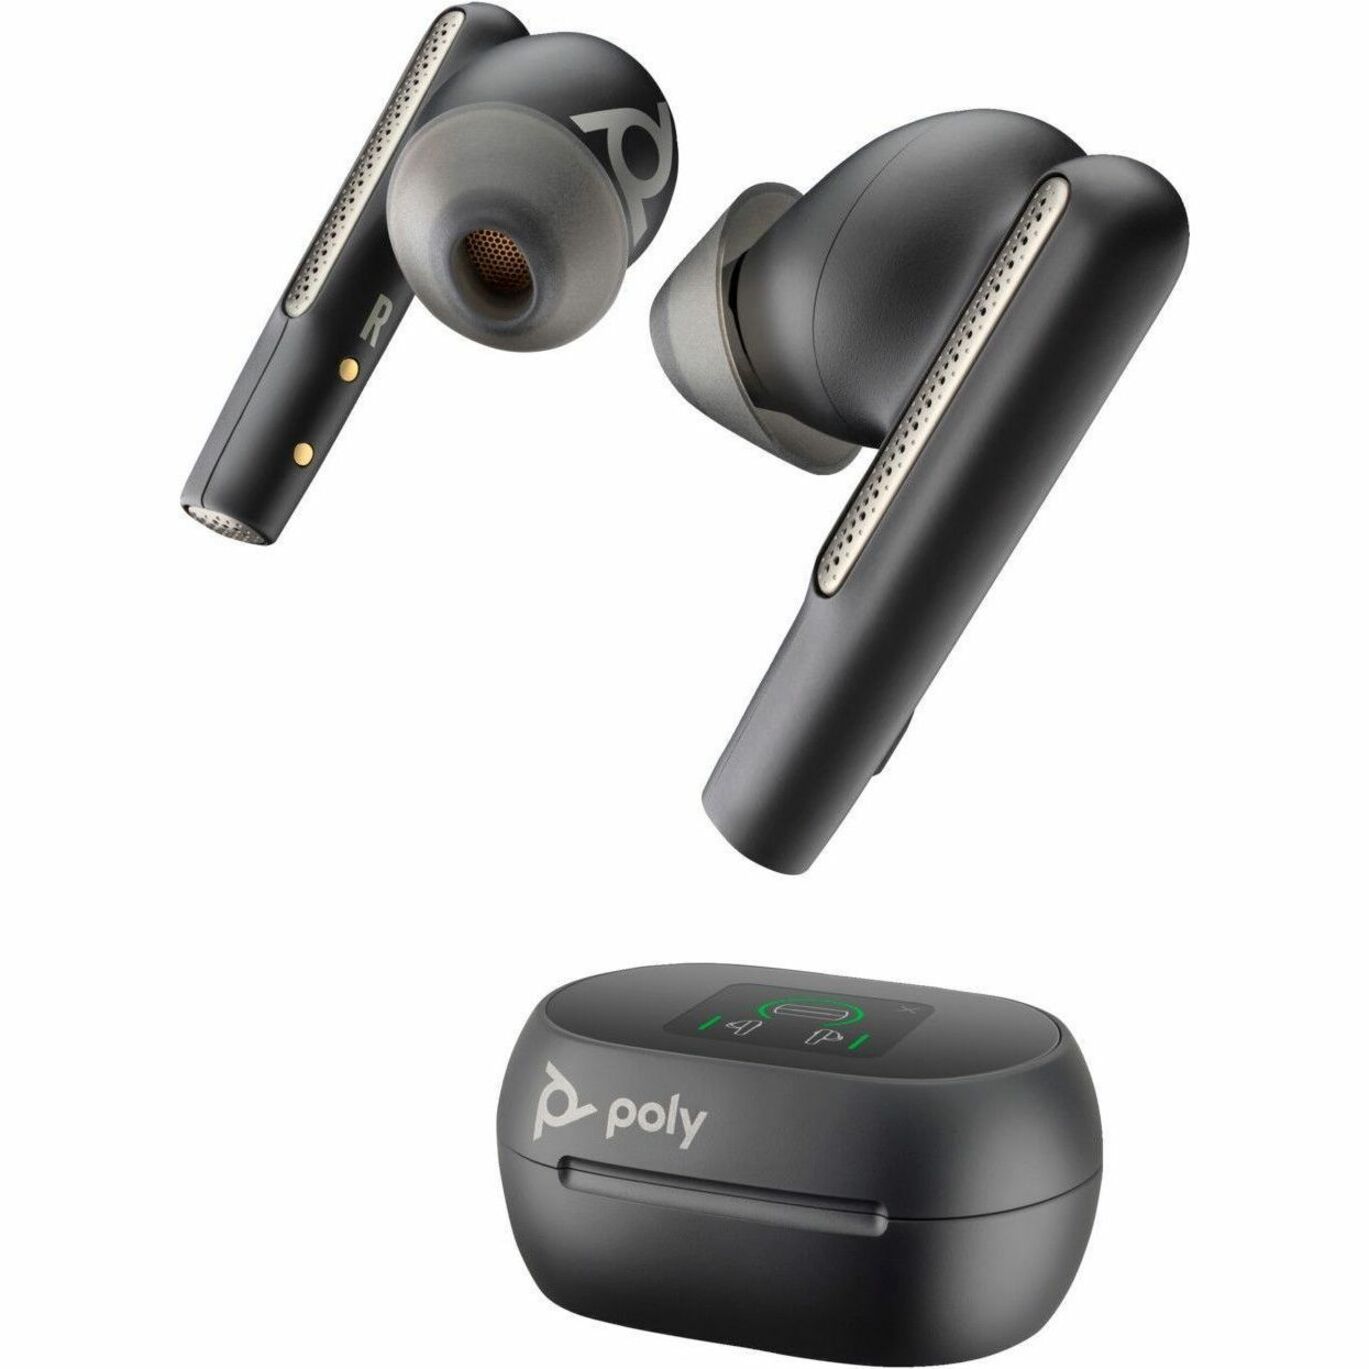 Poly 7Y8G9AA Voyager Free 60+ UC Earset, Wireless Bluetooth Earbuds with 2-Year Warranty, Lightweight and Comfortable, Carbon Black